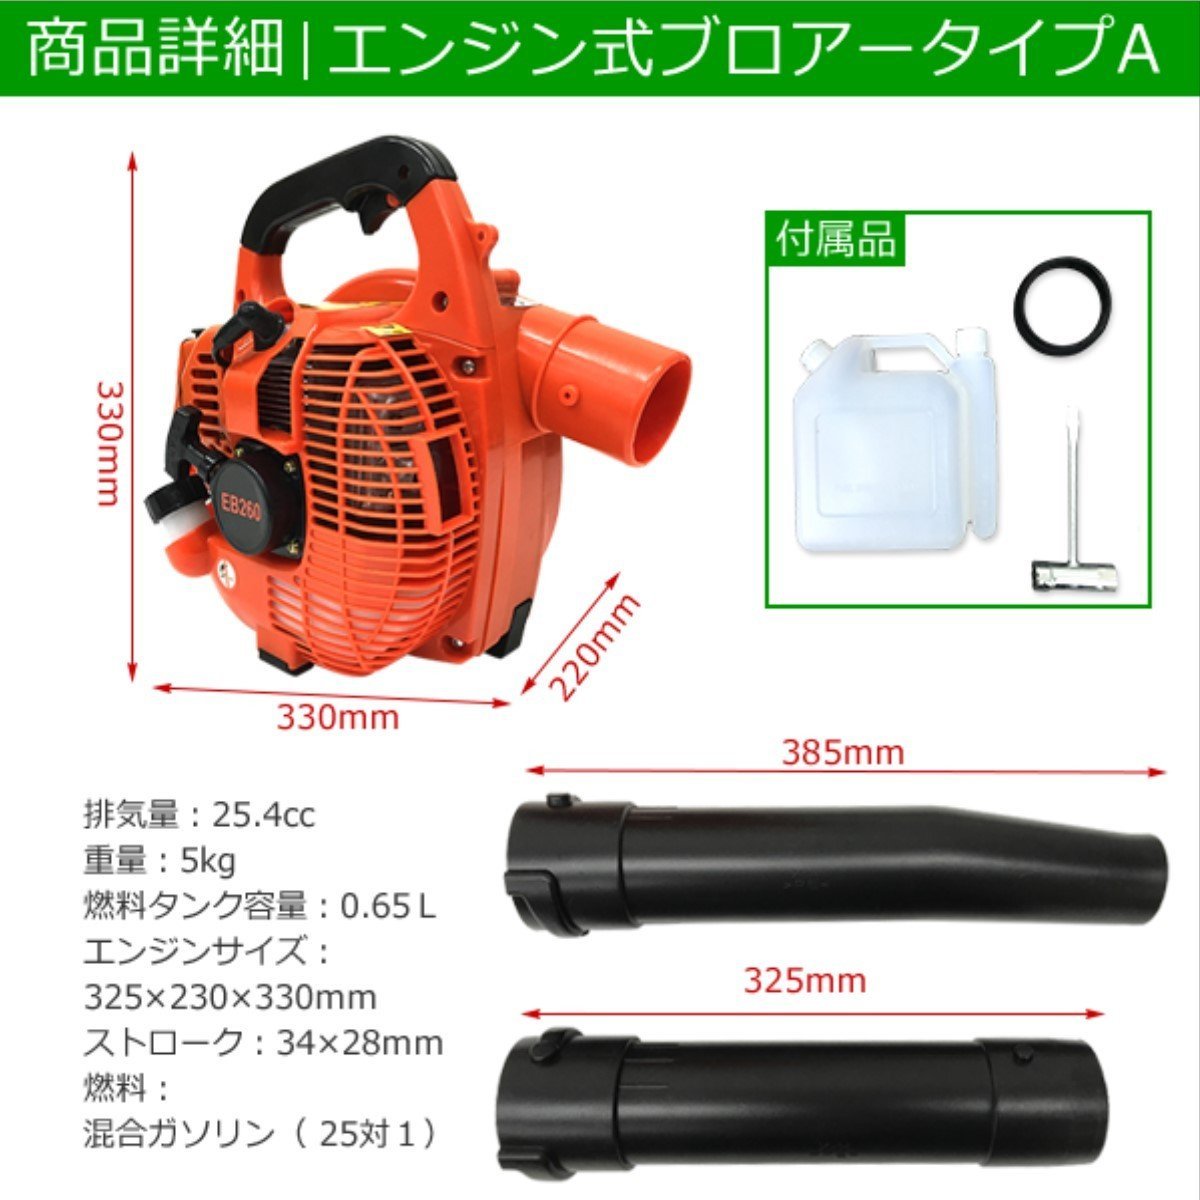 *3 car limitation * engine blower 25.4cc powerful engine blower ventilator in stock type - light weight overwhelming air flow cleaning work powerful .. leaf vacuum cleaner compilation .